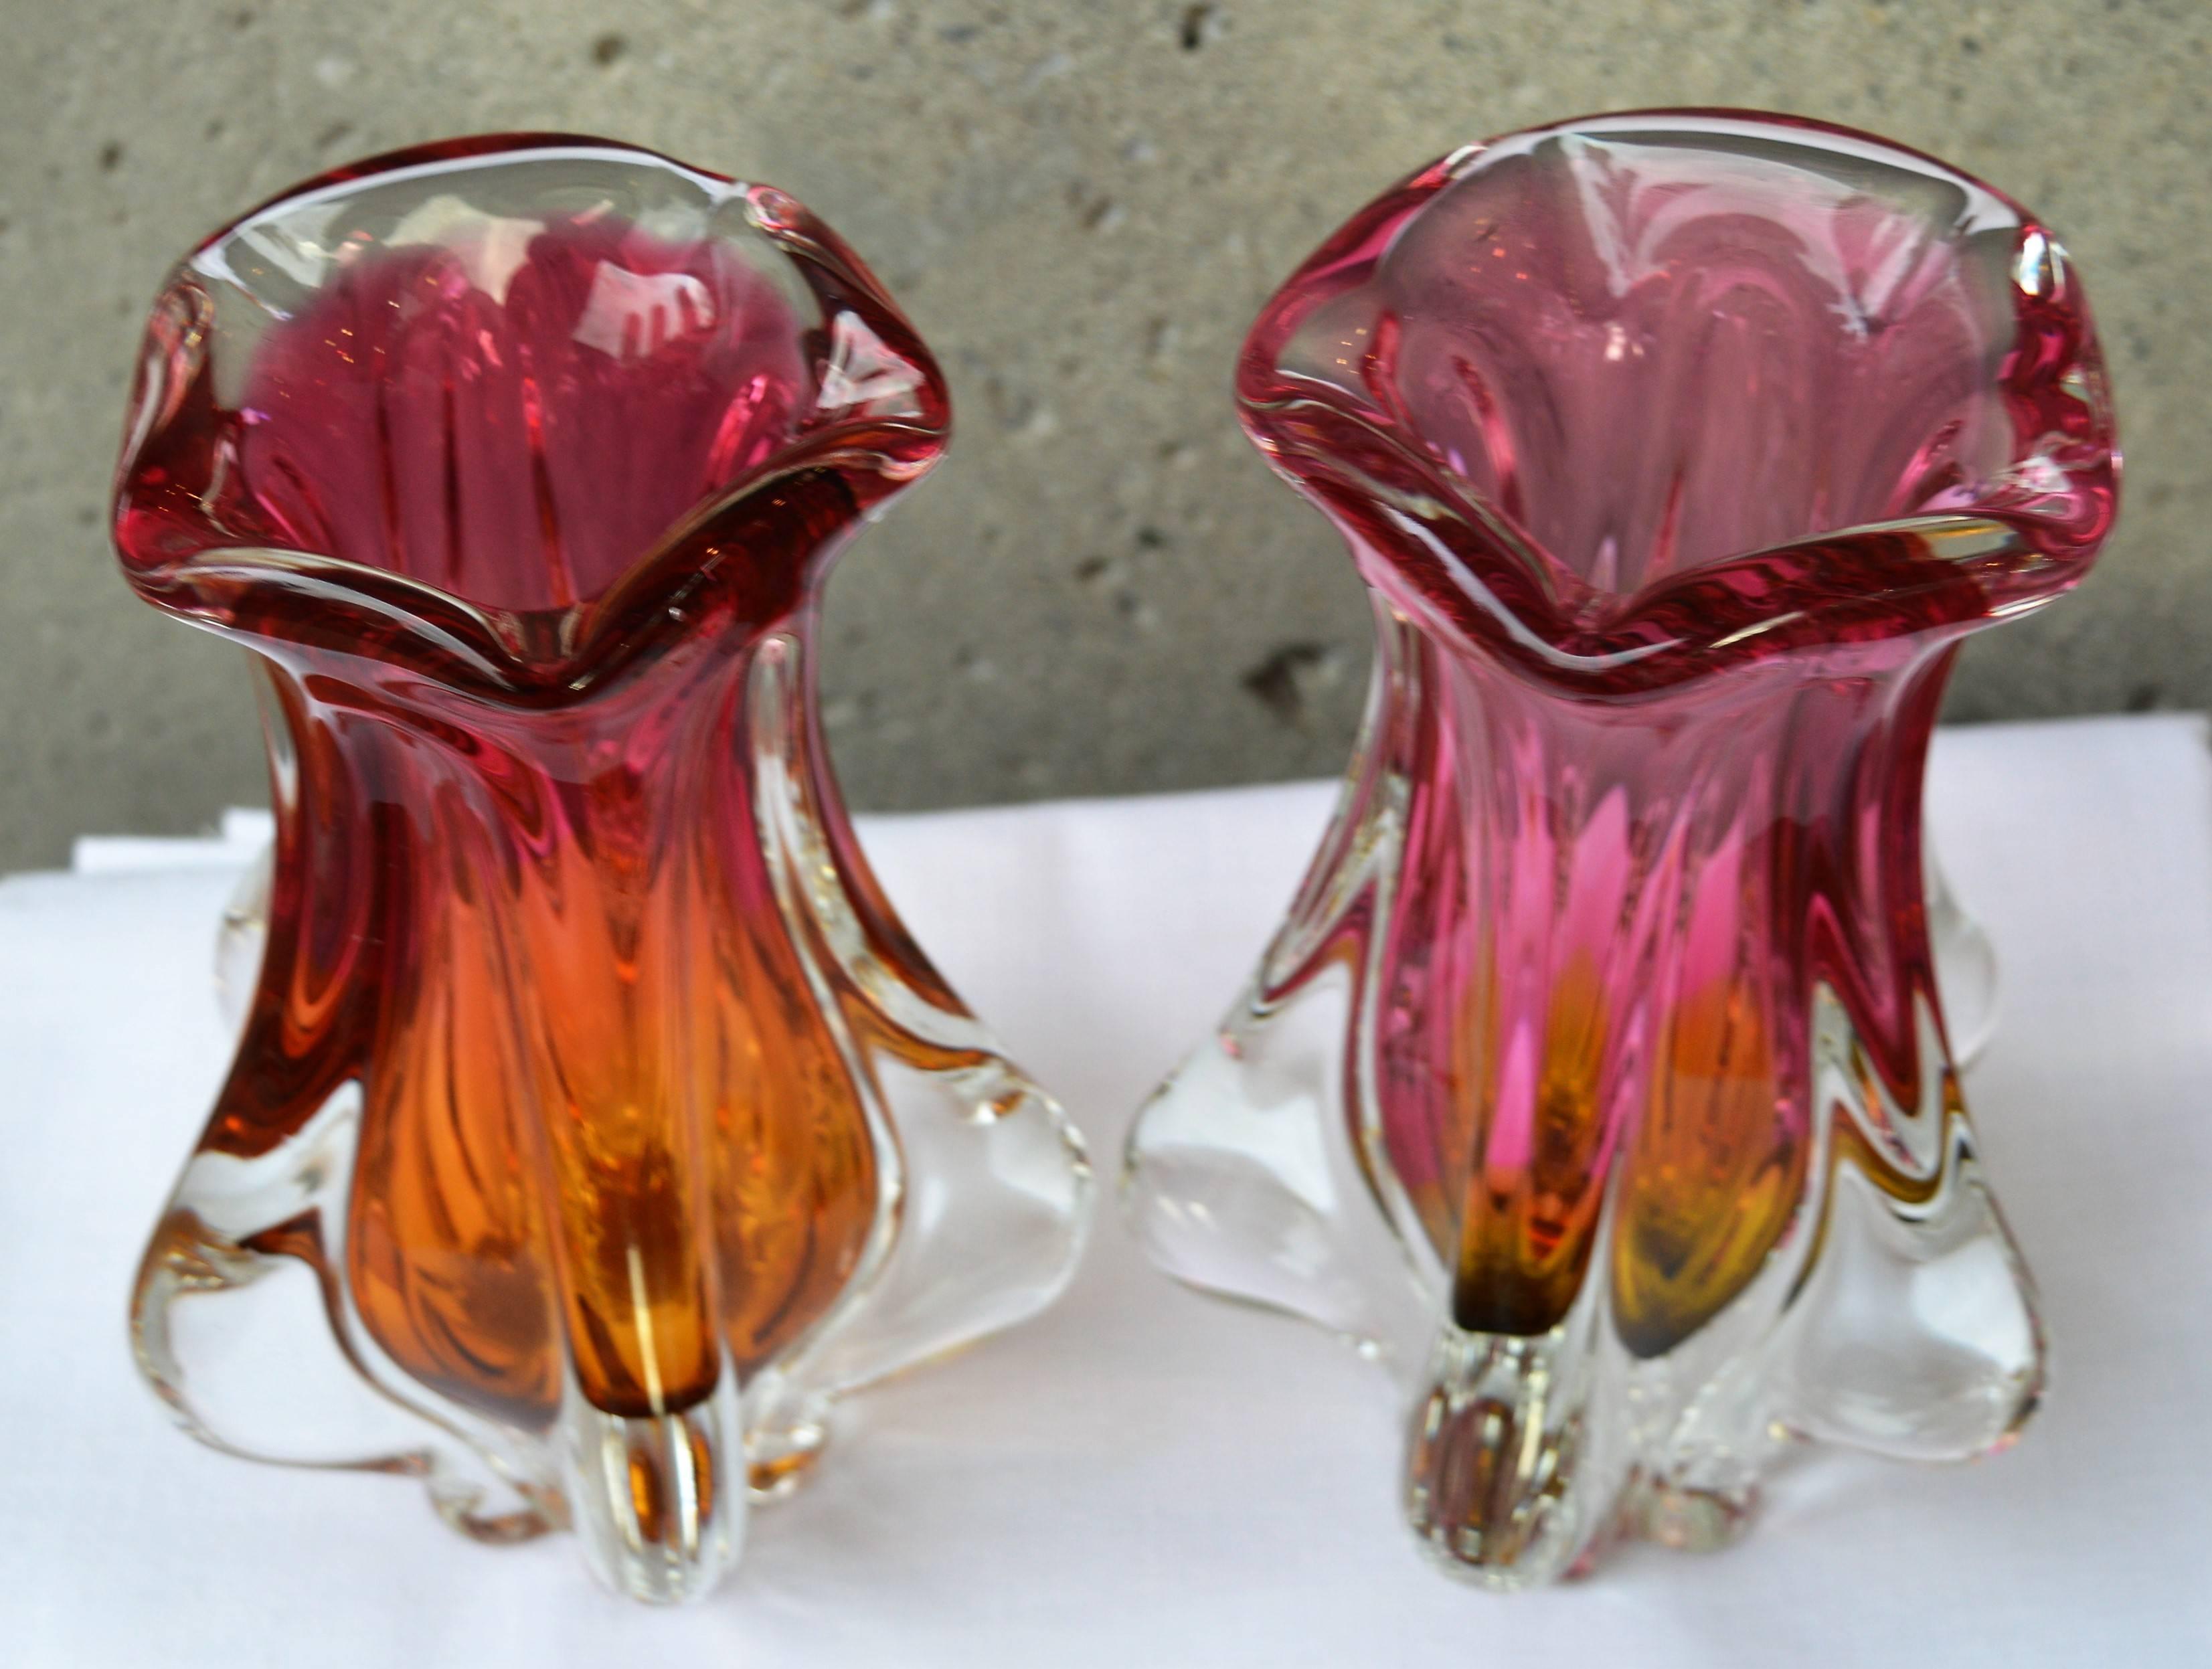 This lovely pair of Czech glass vases are a striking combination of pink and gold with clear fins and base and fluted tops. Made by Josef Hospodka for Chribska Glassworks, they are delightful and sure to be a point of interest in any decor. Rare to